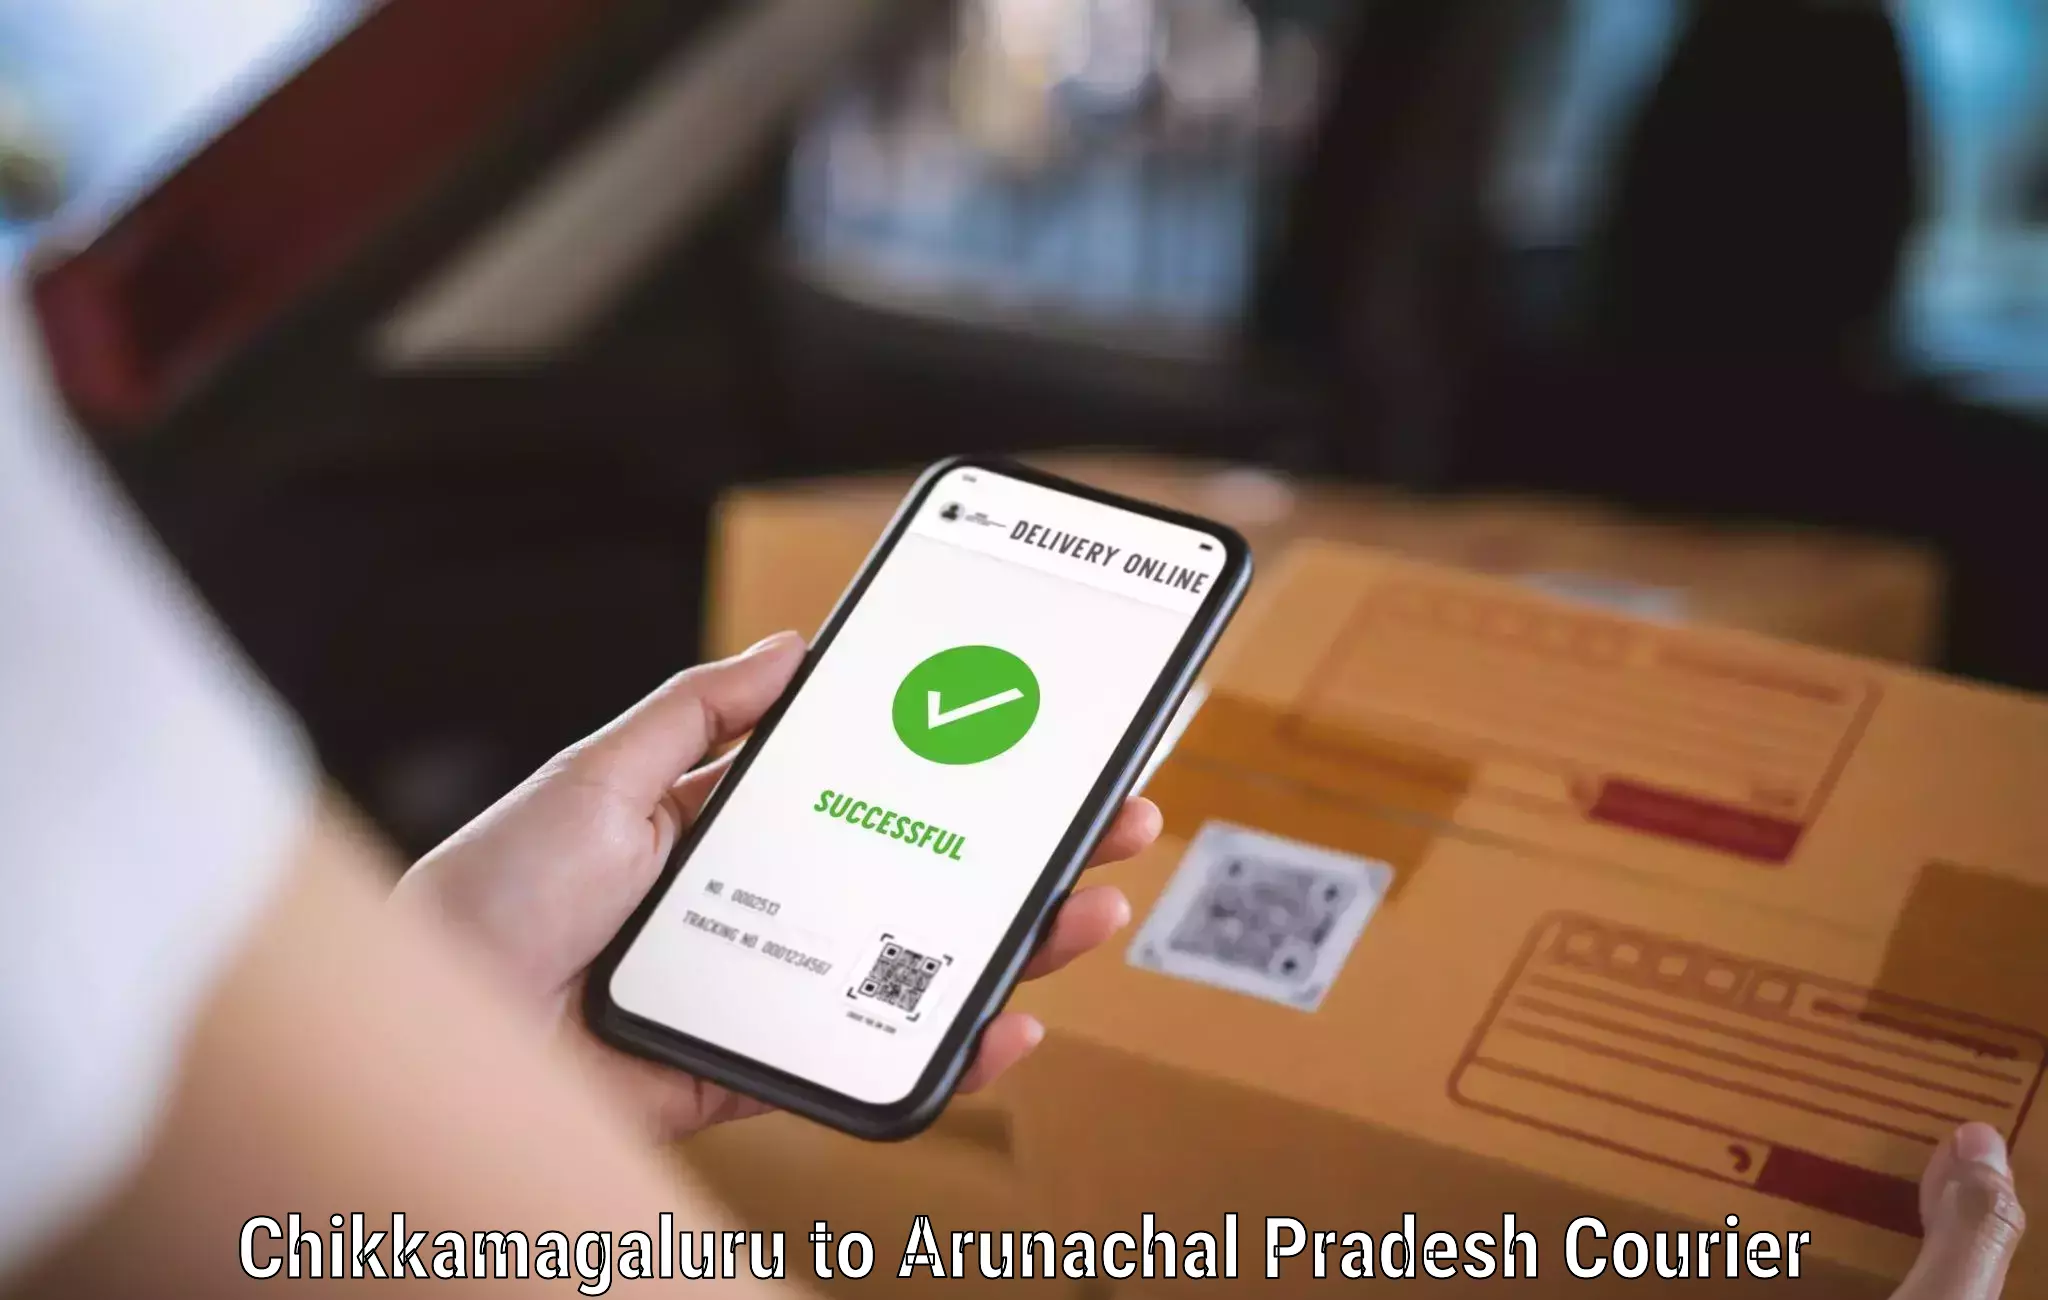 User-friendly courier app Chikkamagaluru to Roing